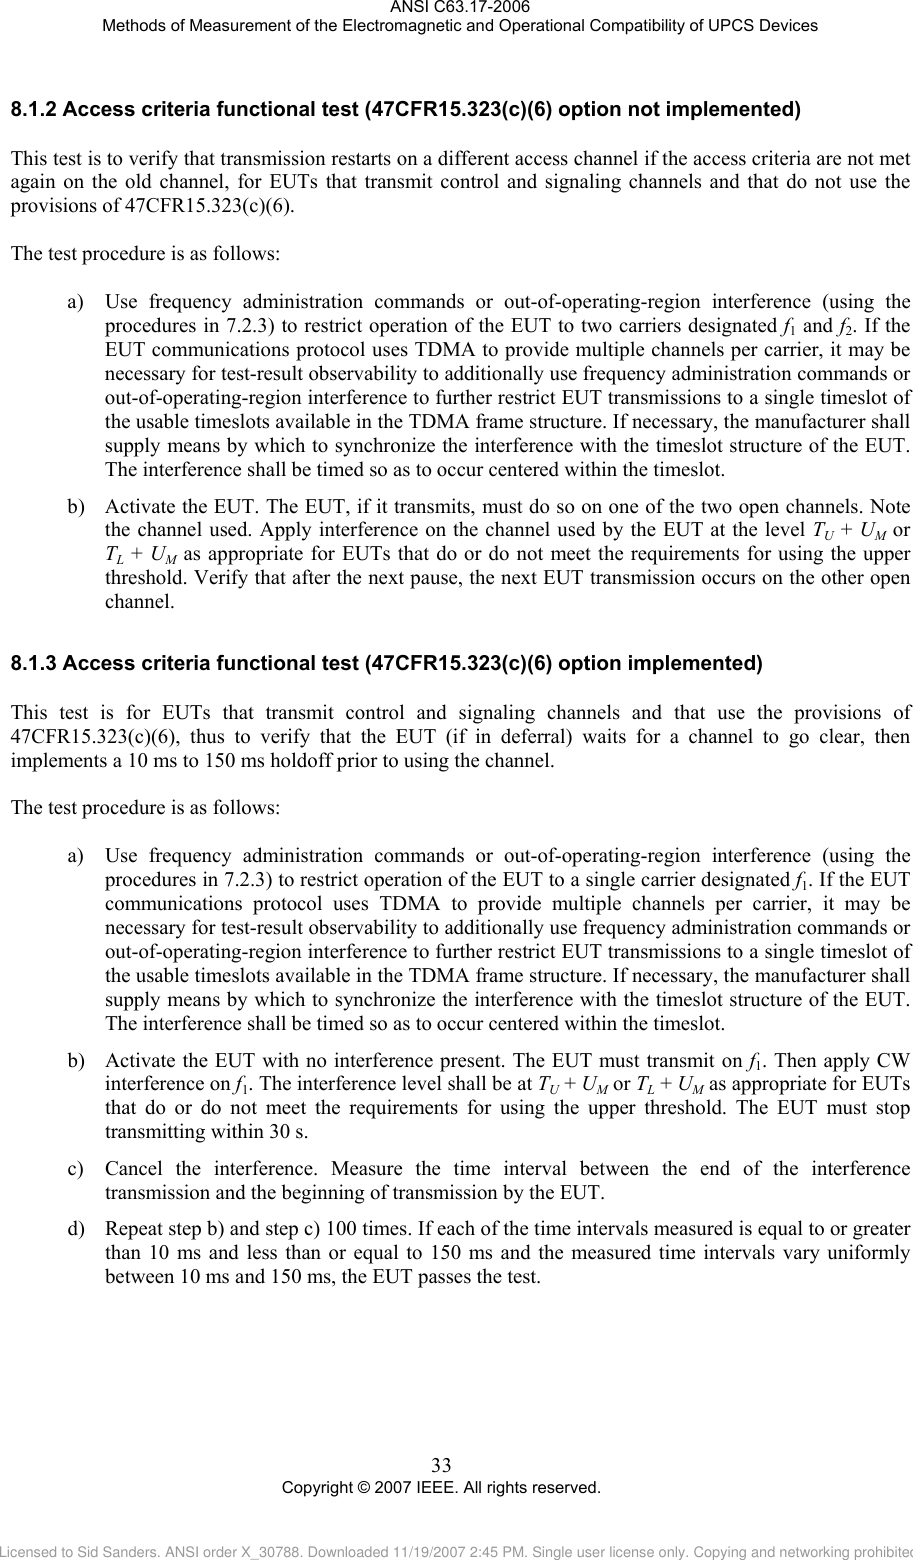 ANSI C63.17-2006 Methods of Measurement of the Electromagnetic and Operational Compatibility of UPCS Devices 8.1.28.1.3 Access criteria functional test (47CFR15.323(c)(6) option not implemented) This test is to verify that transmission restarts on a different access channel if the access criteria are not met again on the old channel, for EUTs that transmit control and signaling channels and that do not use the provisions of 47CFR15.323(c)(6).   The test procedure is as follows:  a) Use frequency administration commands or out-of-operating-region interference (using the procedures in 7.2.3) to restrict operation of the EUT to two carriers designated f1 and f2. If the EUT communications protocol uses TDMA to provide multiple channels per carrier, it may be necessary for test-result observability to additionally use frequency administration commands or out-of-operating-region interference to further restrict EUT transmissions to a single timeslot of the usable timeslots available in the TDMA frame structure. If necessary, the manufacturer shall supply means by which to synchronize the interference with the timeslot structure of the EUT. The interference shall be timed so as to occur centered within the timeslot. b) Activate the EUT. The EUT, if it transmits, must do so on one of the two open channels. Note the channel used. Apply interference on the channel used by the EUT at the level TU + UM or  TL + UM as appropriate for EUTs that do or do not meet the requirements for using the upper threshold. Verify that after the next pause, the next EUT transmission occurs on the other open channel.  Access criteria functional test (47CFR15.323(c)(6) option implemented) This test is for EUTs that transmit control and signaling channels and that use the provisions of 47CFR15.323(c)(6), thus to verify that the EUT (if in deferral) waits for a channel to go clear, then implements a 10 ms to 150 ms holdoff prior to using the channel.   The test procedure is as follows:  a) Use frequency administration commands or out-of-operating-region interference (using the procedures in 7.2.3) to restrict operation of the EUT to a single carrier designated f1. If the EUT communications protocol uses TDMA to provide multiple channels per carrier, it may be necessary for test-result observability to additionally use frequency administration commands or out-of-operating-region interference to further restrict EUT transmissions to a single timeslot of the usable timeslots available in the TDMA frame structure. If necessary, the manufacturer shall supply means by which to synchronize the interference with the timeslot structure of the EUT. The interference shall be timed so as to occur centered within the timeslot.  b) Activate the EUT with no interference present. The EUT must transmit on f1. Then apply CW interference on f1. The interference level shall be at TU + UM or TL + UM as appropriate for EUTs that do or do not meet the requirements for using the upper threshold. The EUT must stop transmitting within 30 s.  c) Cancel the interference. Measure the time interval between the end of the interference transmission and the beginning of transmission by the EUT.  d) Repeat step b) and step c) 100 times. If each of the time intervals measured is equal to or greater than 10 ms and less than or equal to 150 ms and the measured time intervals vary uniformly between 10 ms and 150 ms, the EUT passes the test. 33 Copyright © 2007 IEEE. All rights reserved. Licensed to Sid Sanders. ANSI order X_30788. Downloaded 11/19/2007 2:45 PM. Single user license only. Copying and networking prohibited.